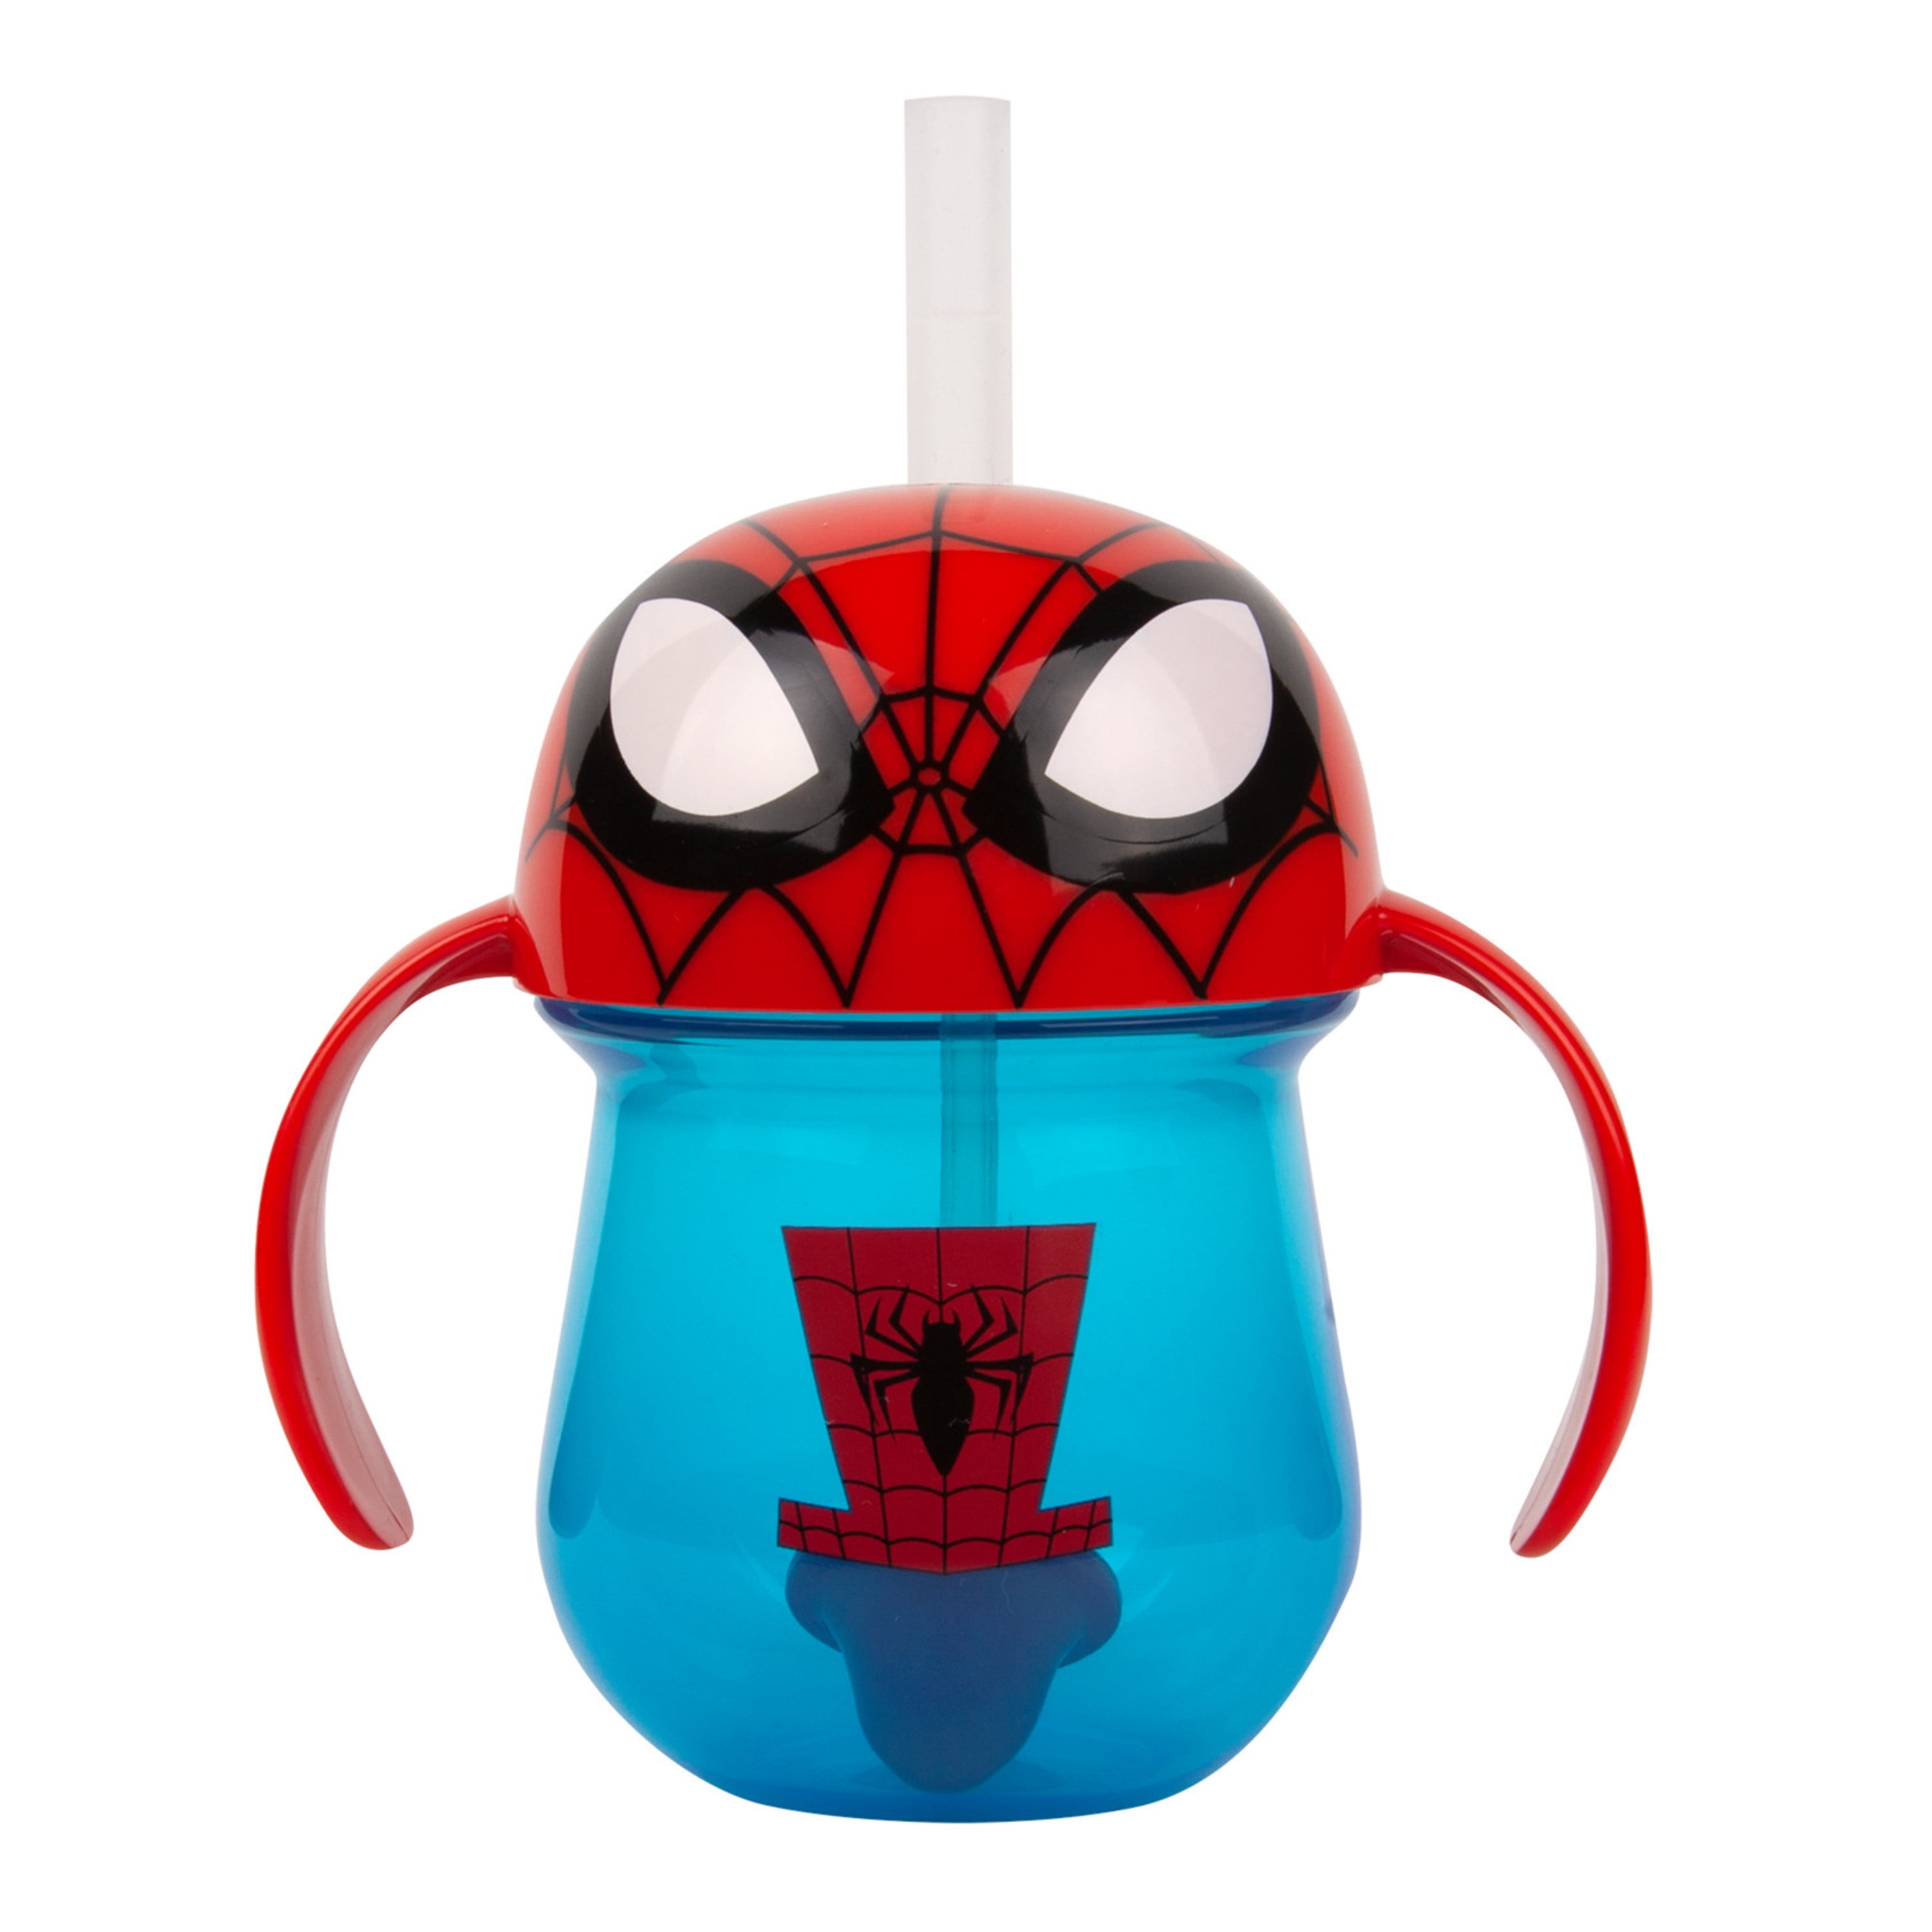 Disney Spider Man Far From Home Movie Topper Cup 22oz Coke Sippy